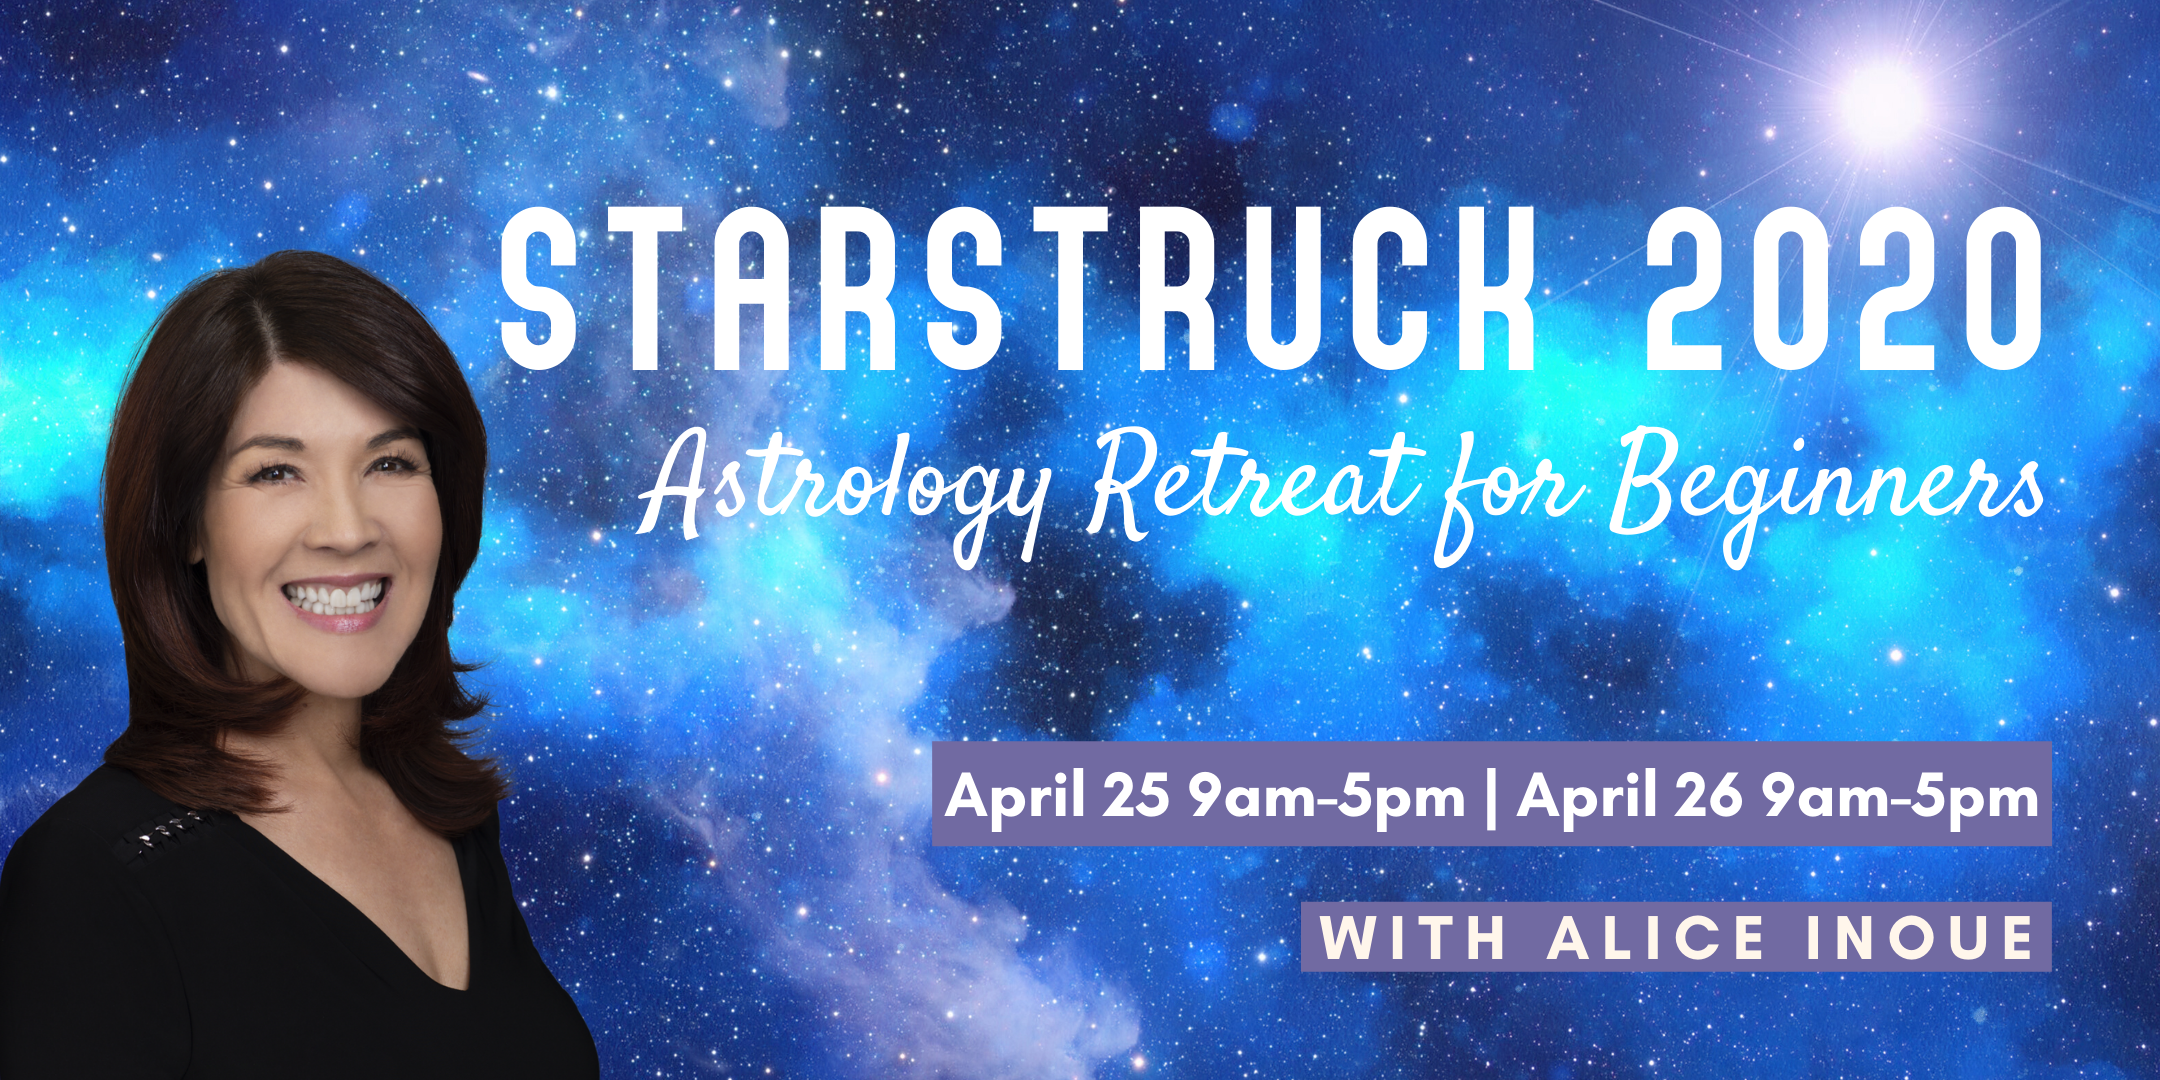 Starstruck 2020: Astrology Retreat for Beginners with Alice Inoue